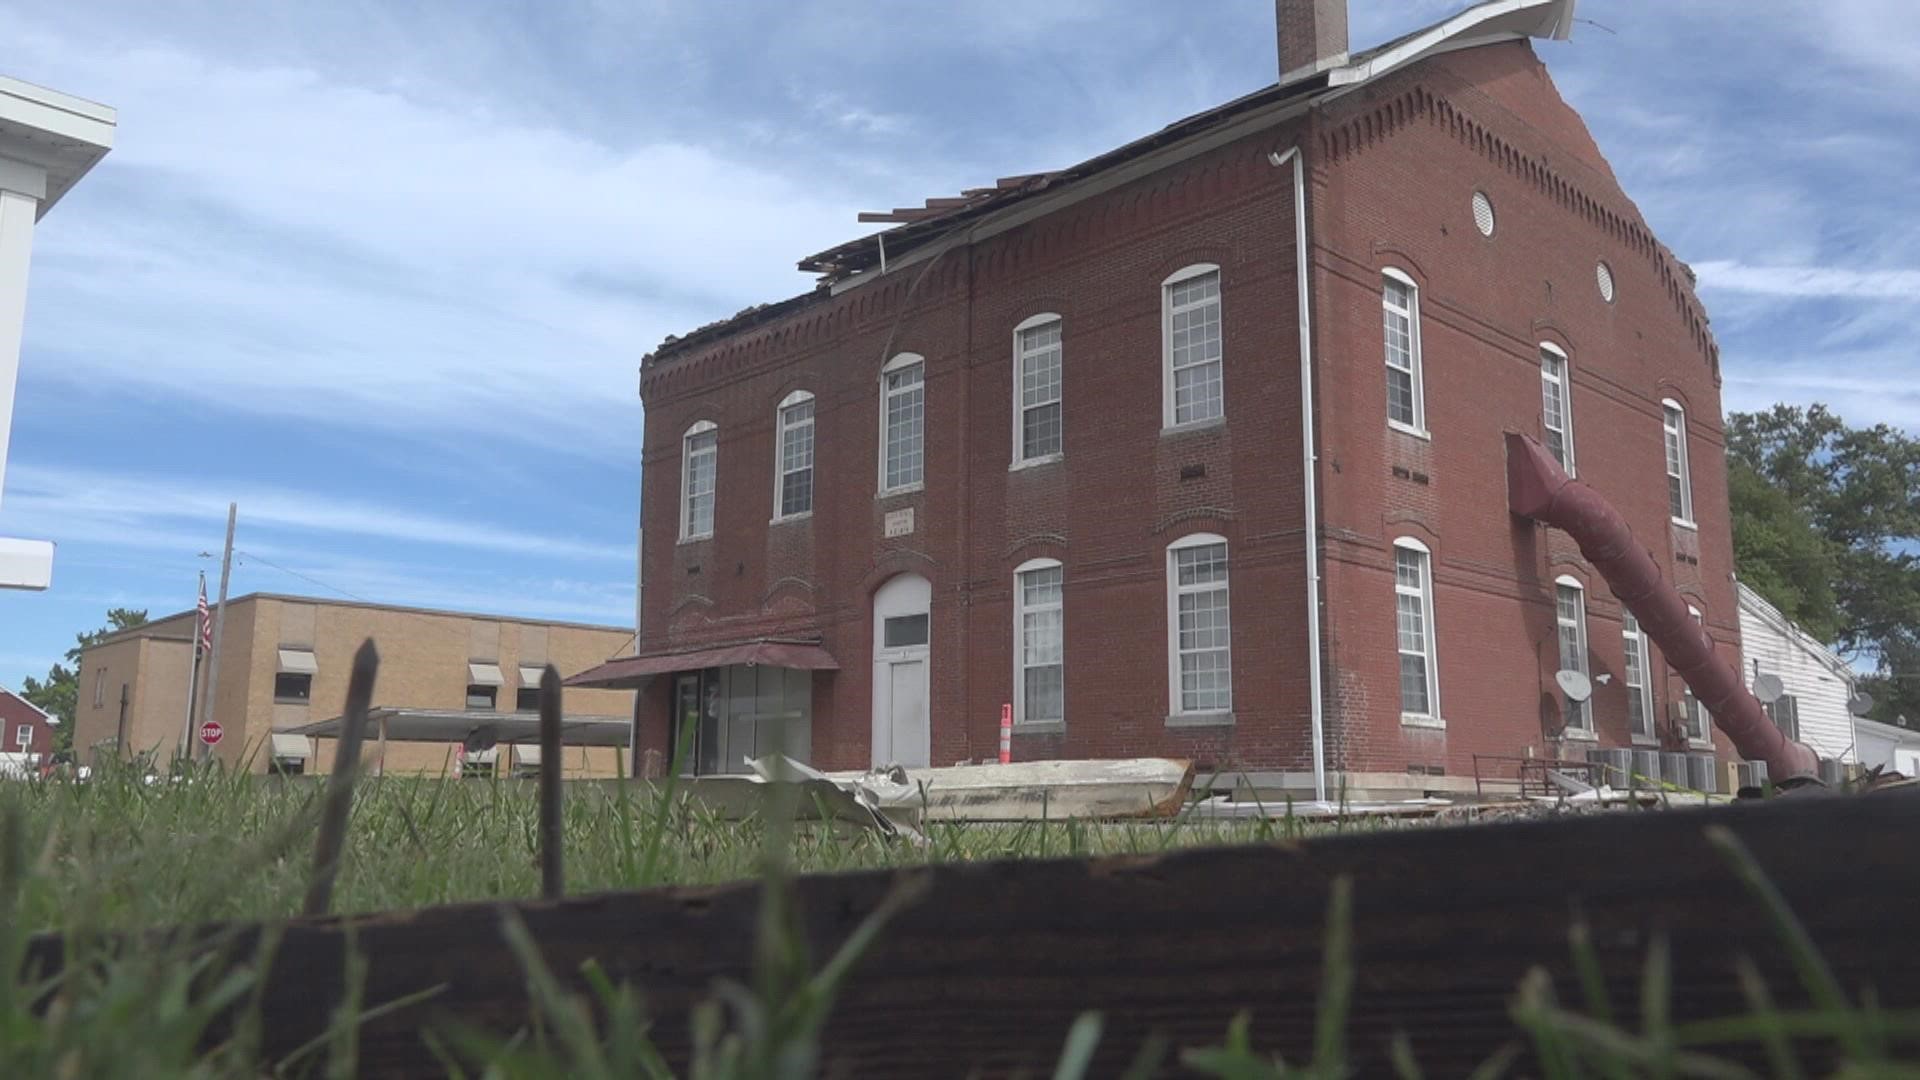 Freeburg's fire chief said a unique feature of the historic building may have saved the people inside.